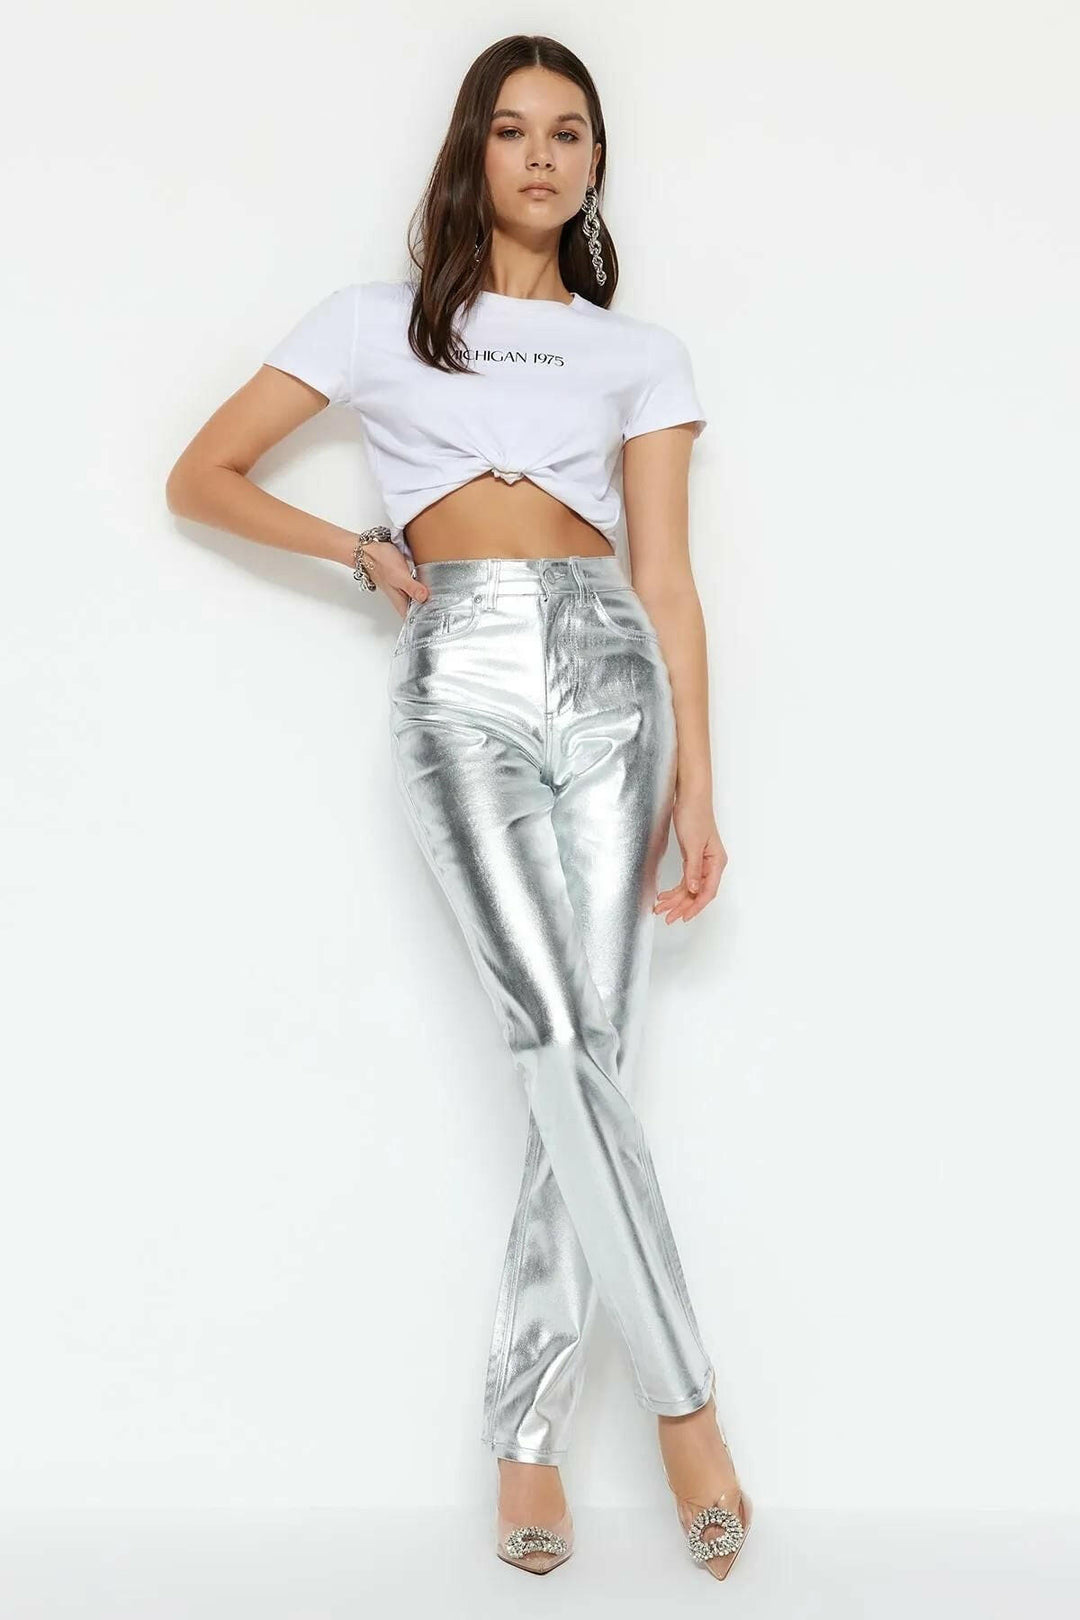 Silver Shiny Metallic Print High-Waisted Straight Jeans- Noxlook